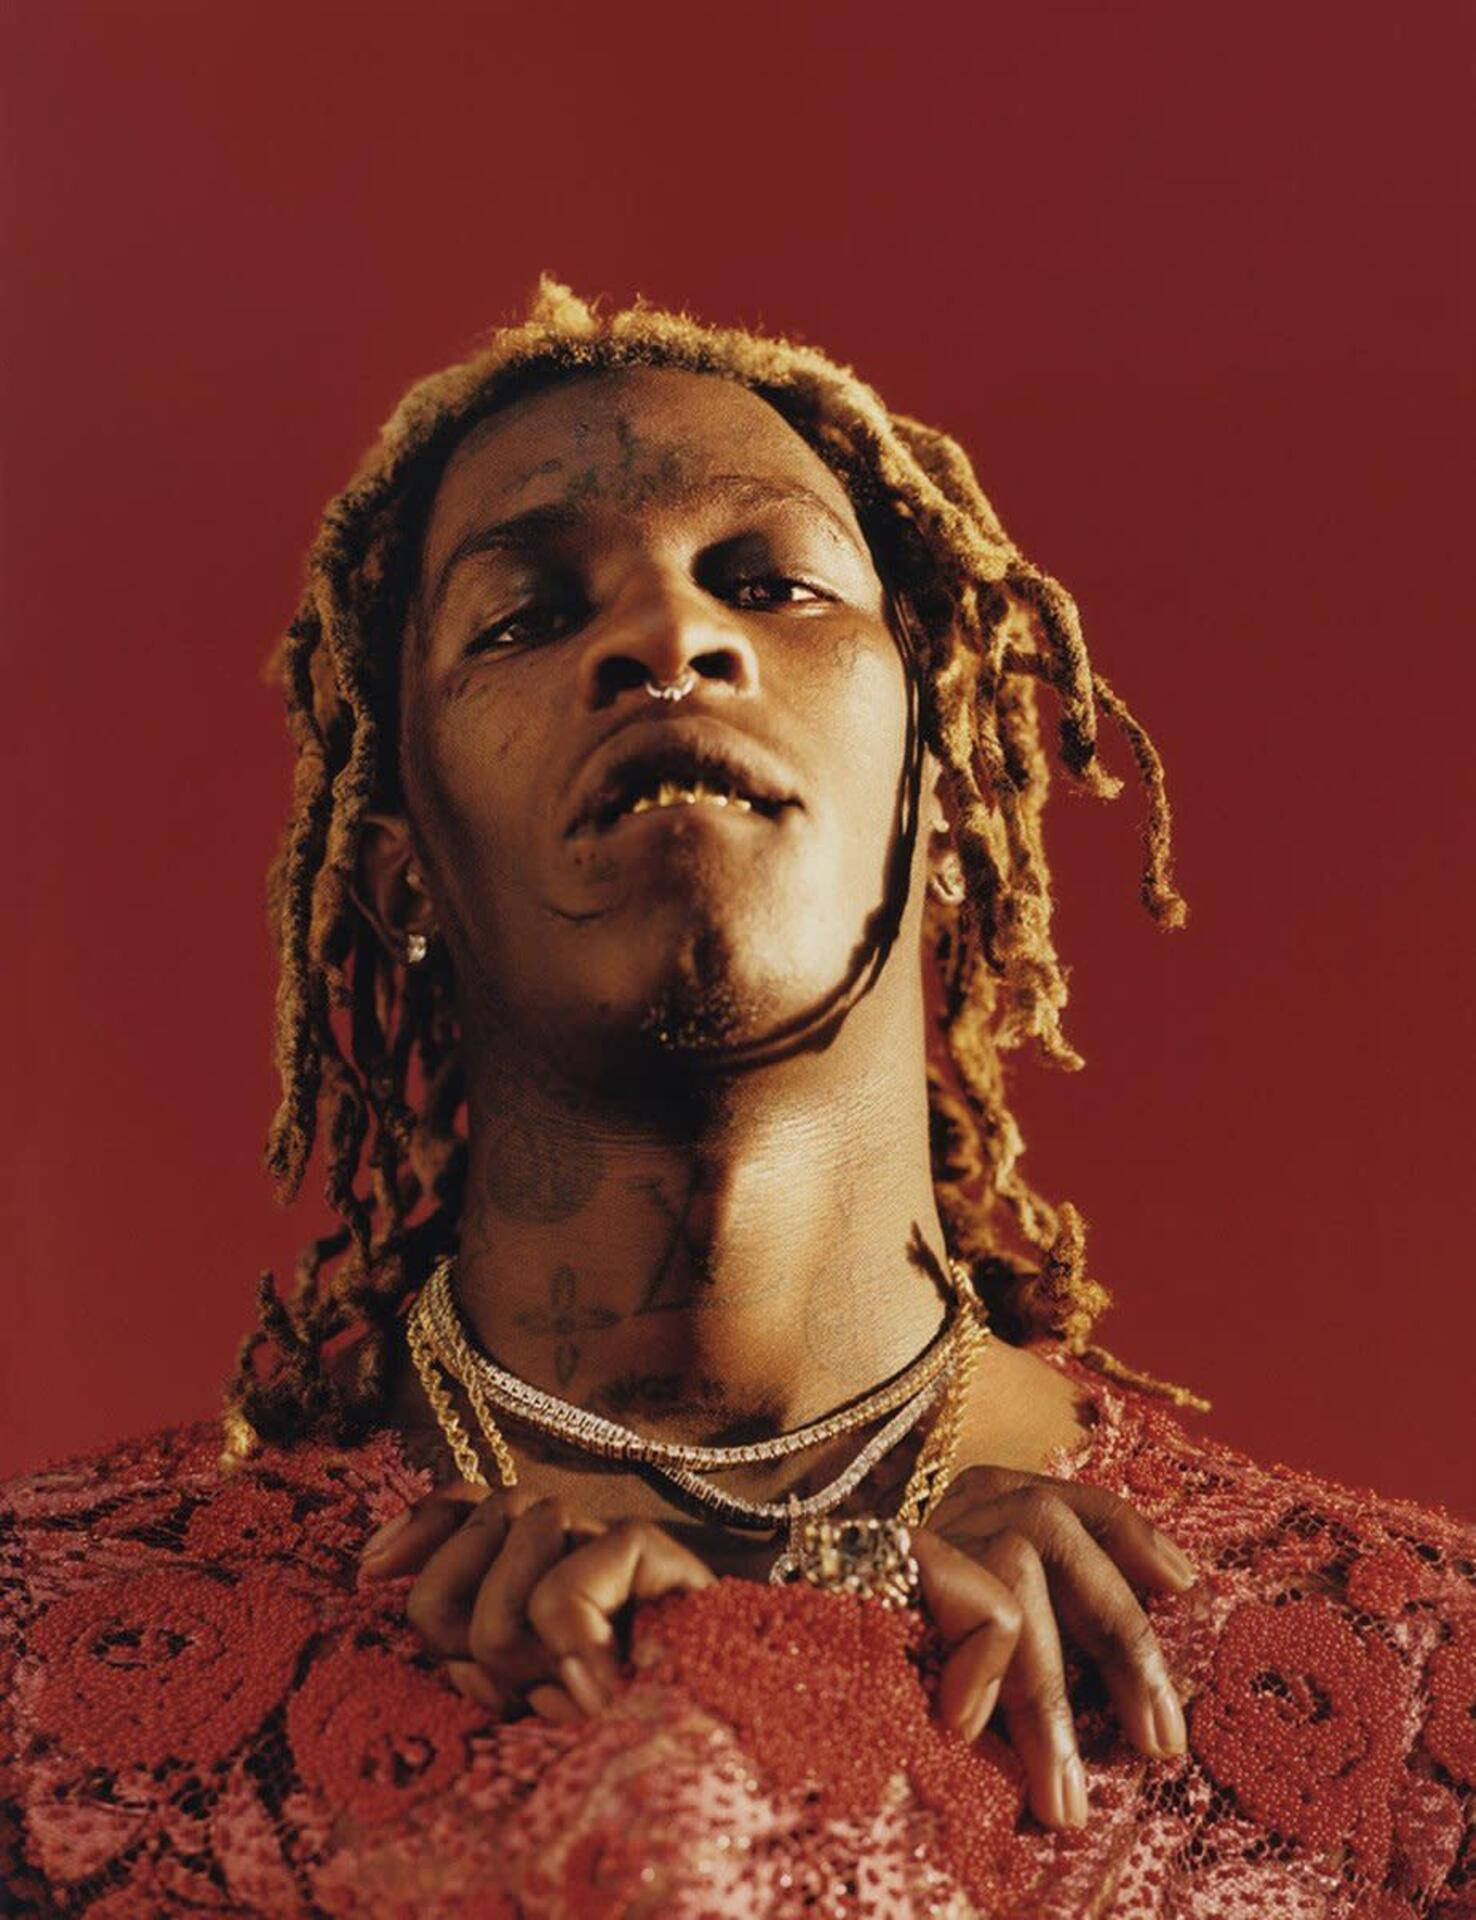 Young Thug posing by a red phone Wallpaper